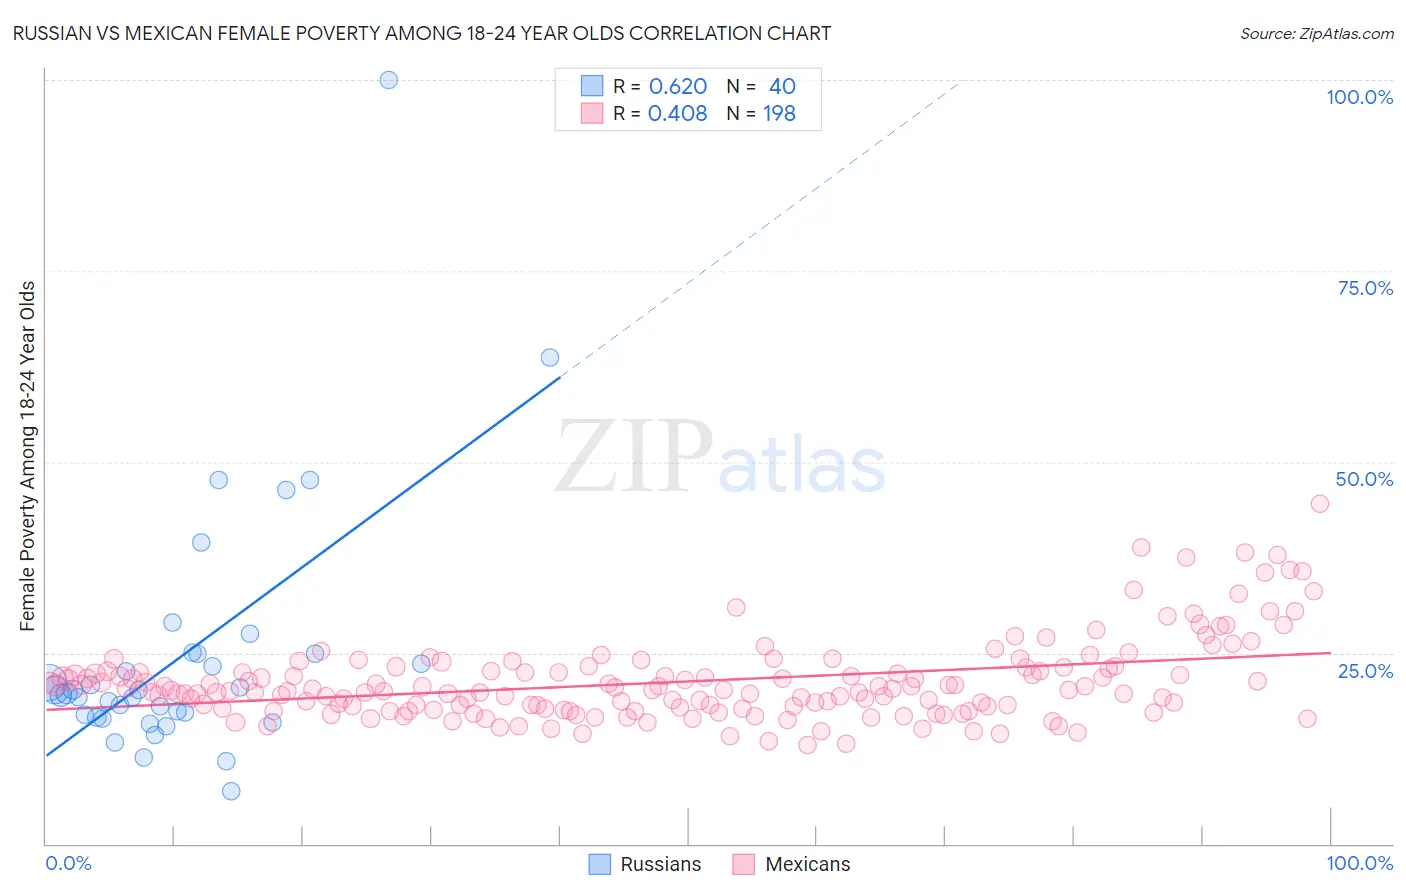 Russian vs Mexican Female Poverty Among 18-24 Year Olds